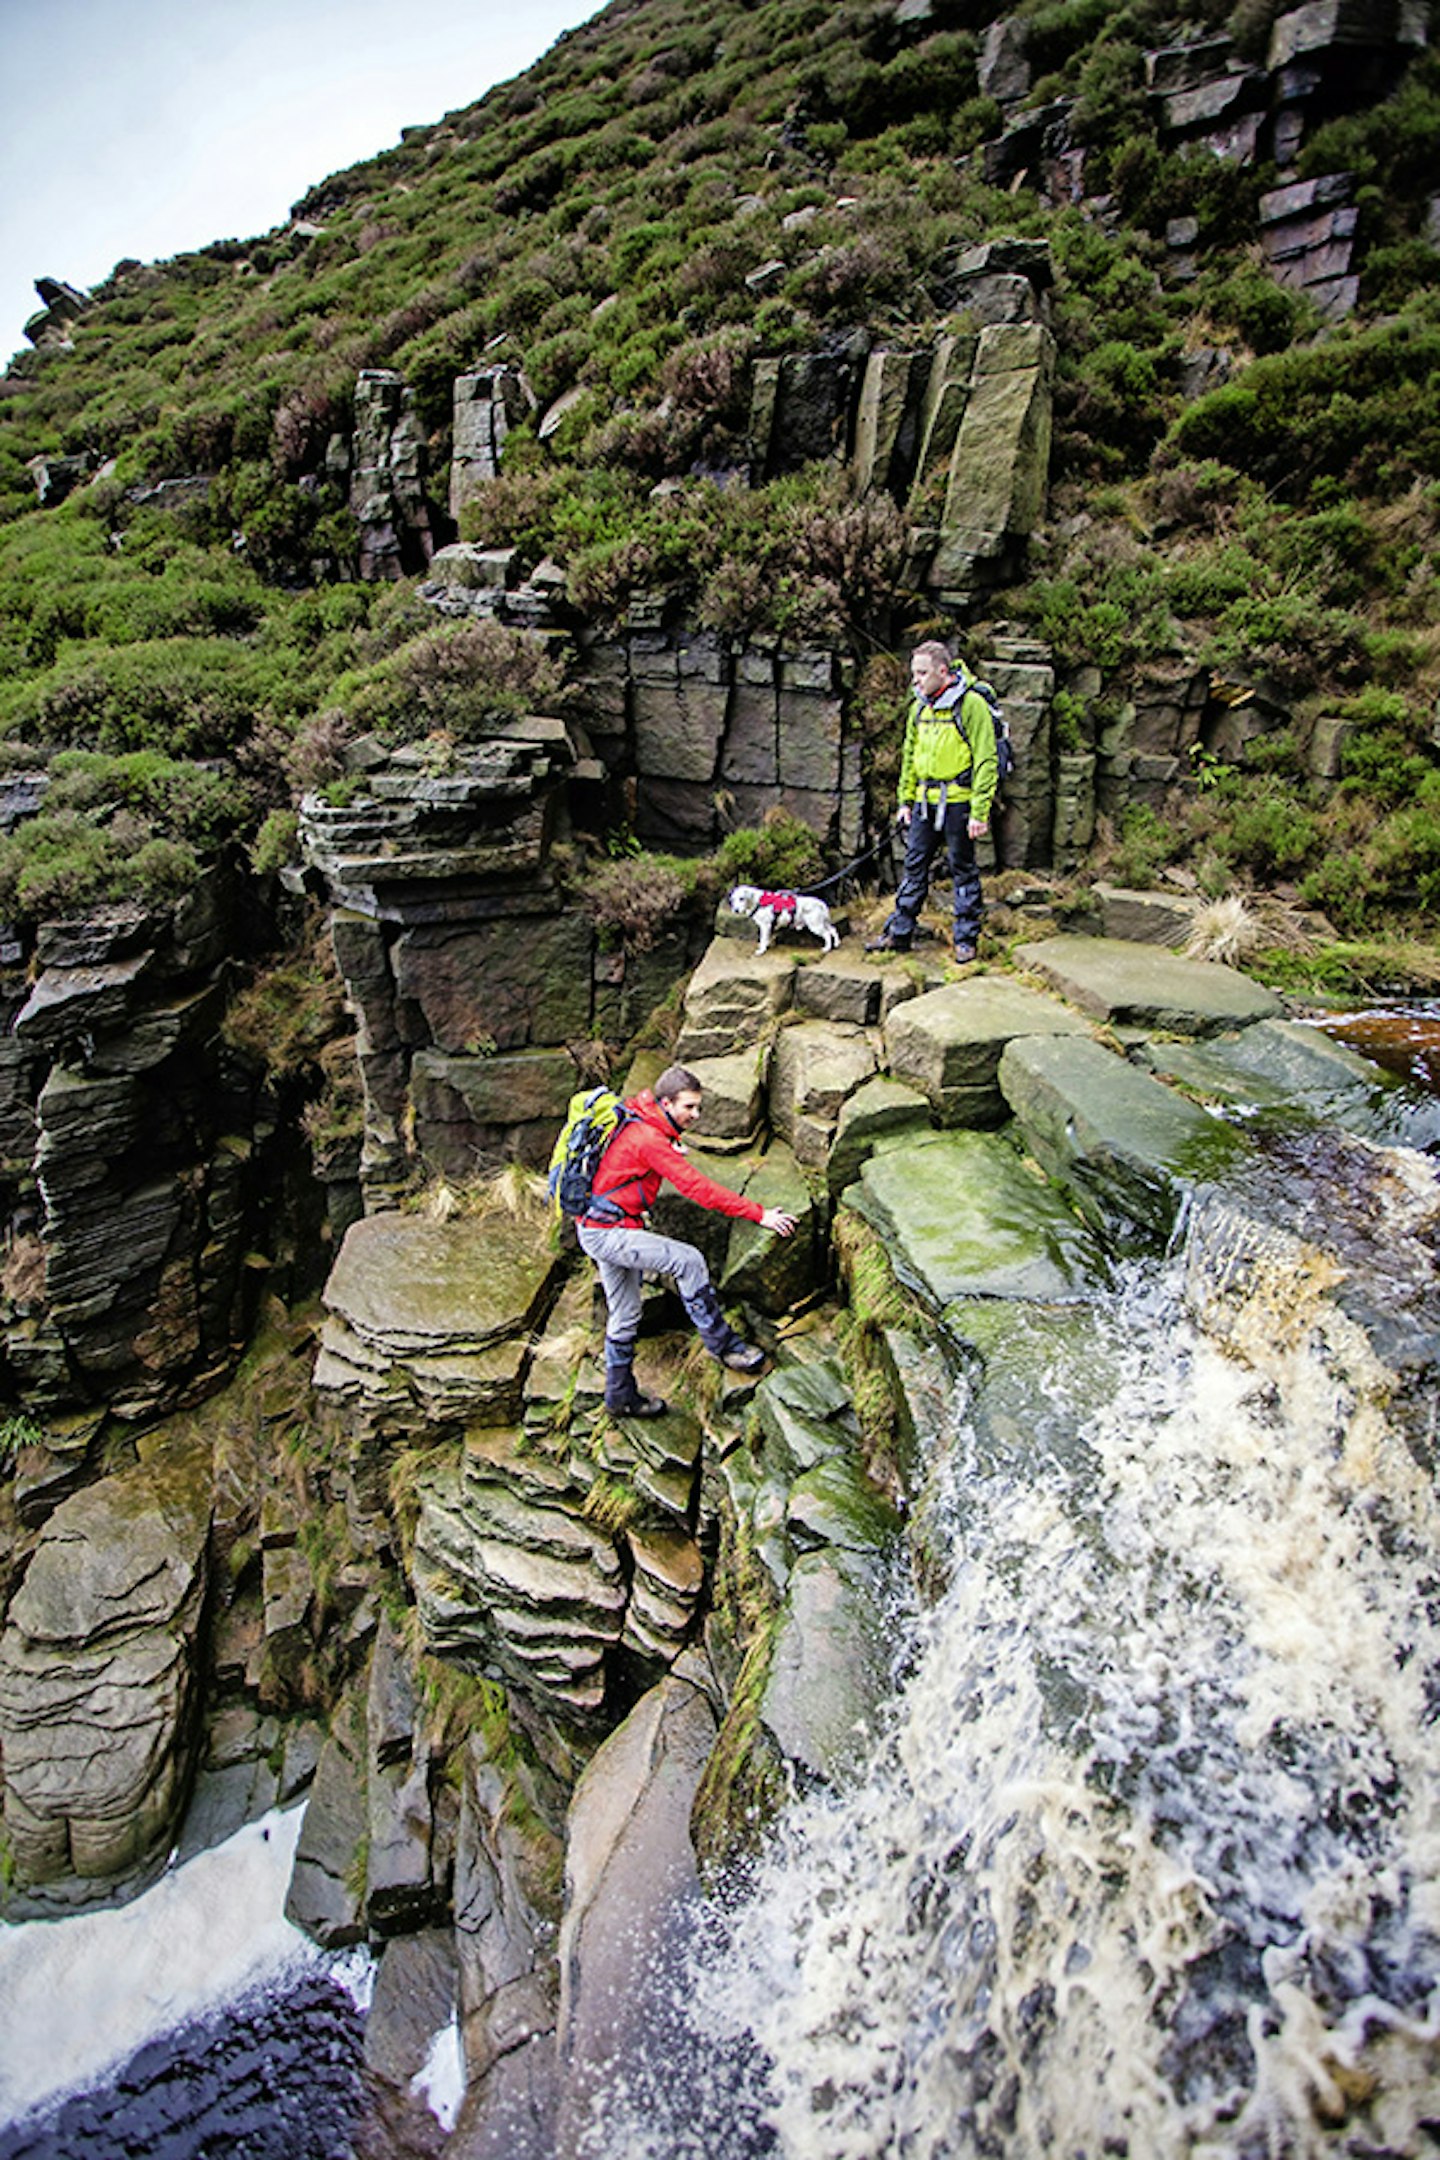 Just one of many watery obstacles on the ascent of the clough.